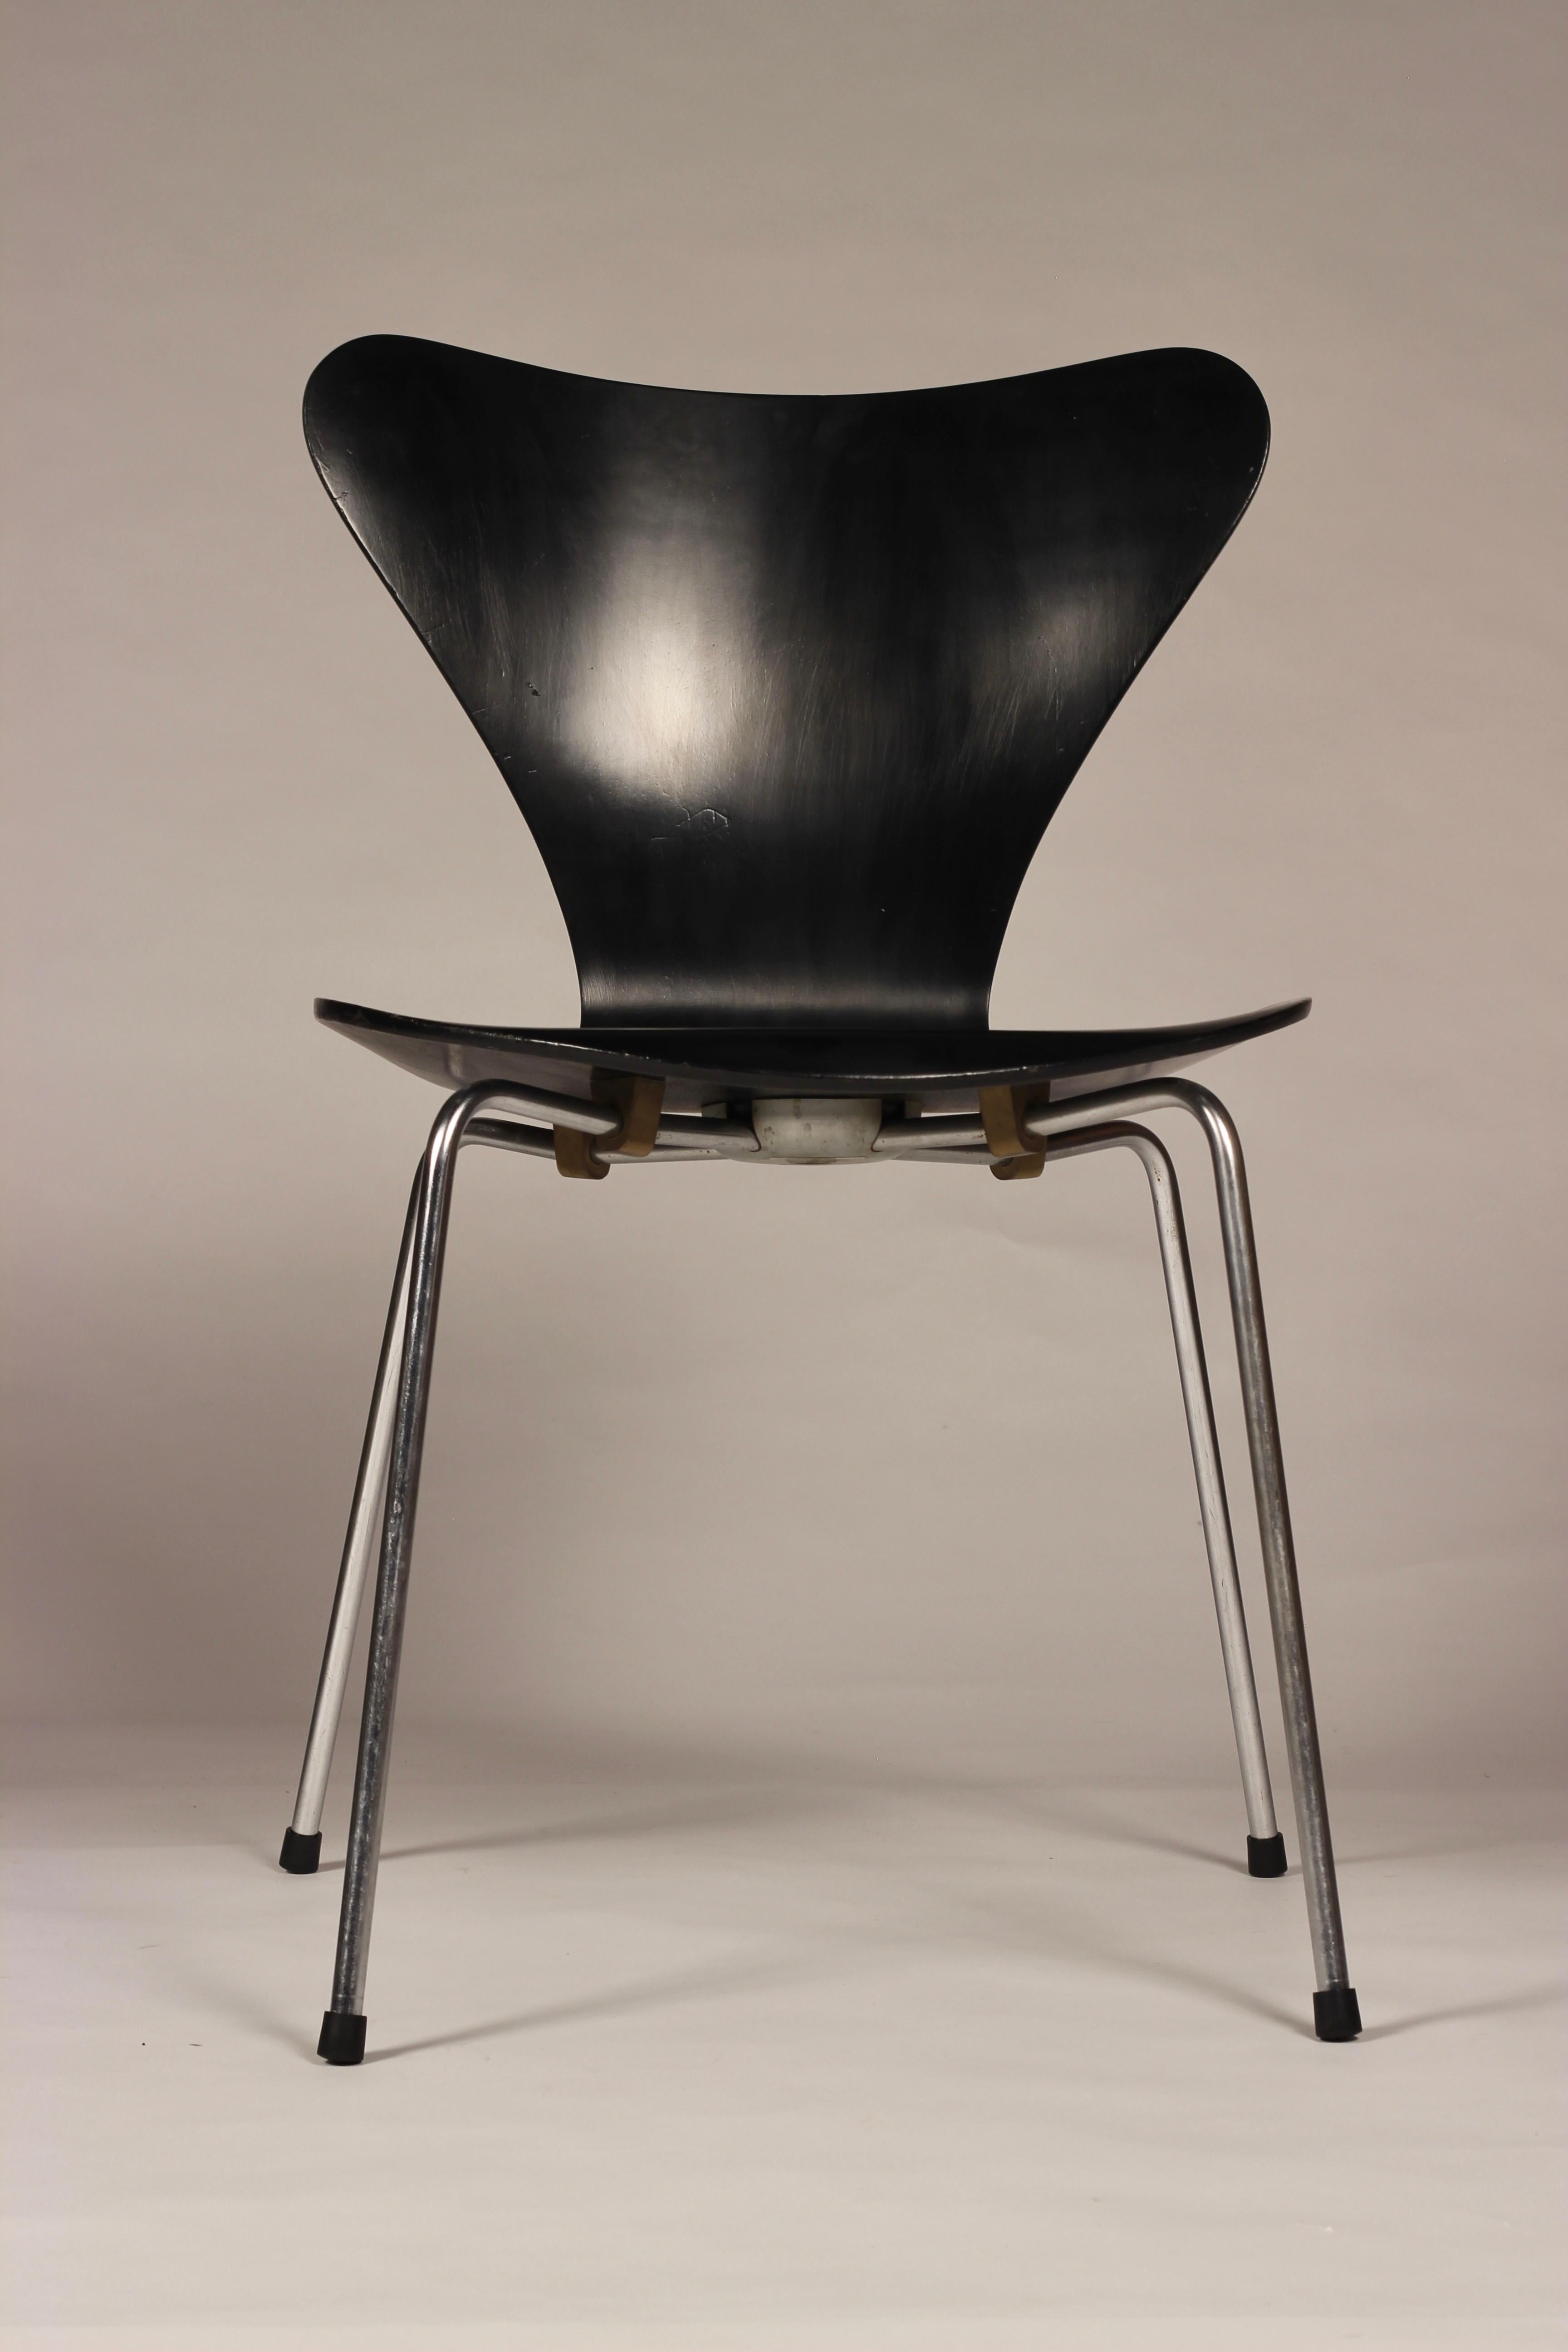 Arne Jacobsen Series 7 or 3107 Chairs by Fritz Hansen Mid Century Modern 1964 In Good Condition For Sale In London, GB